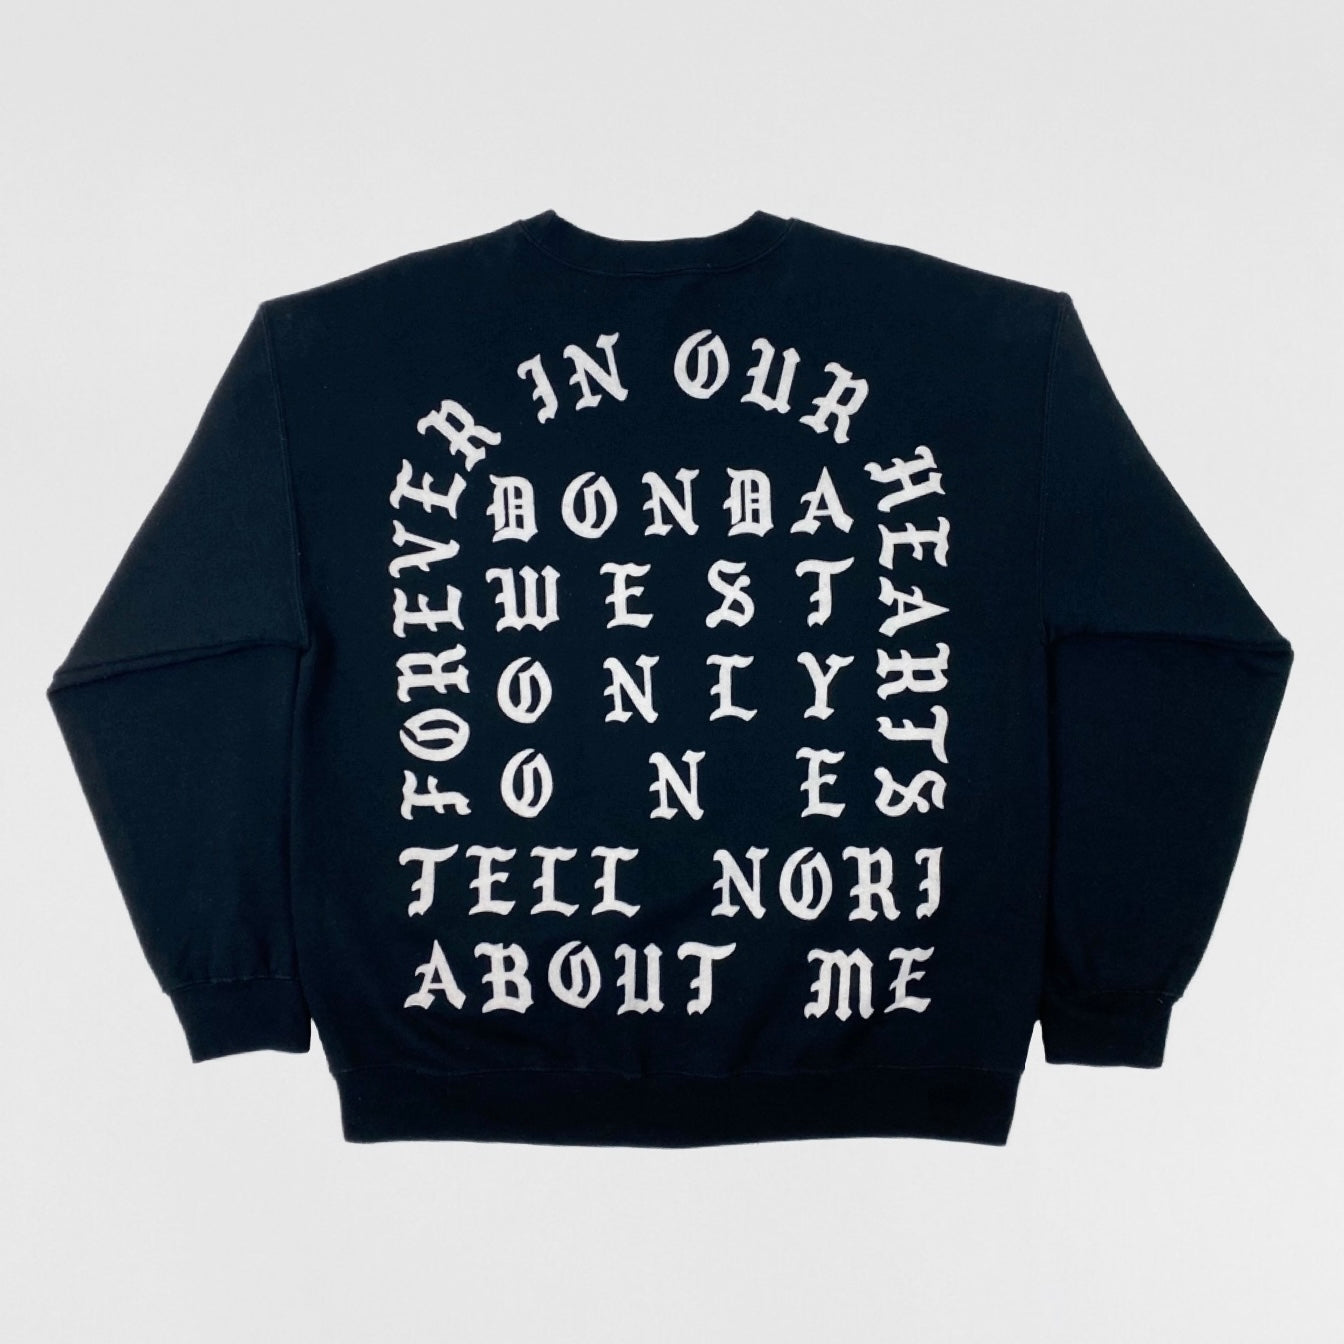 TLOP 2015 Donda ‘Only One’ Crewneck Sweater